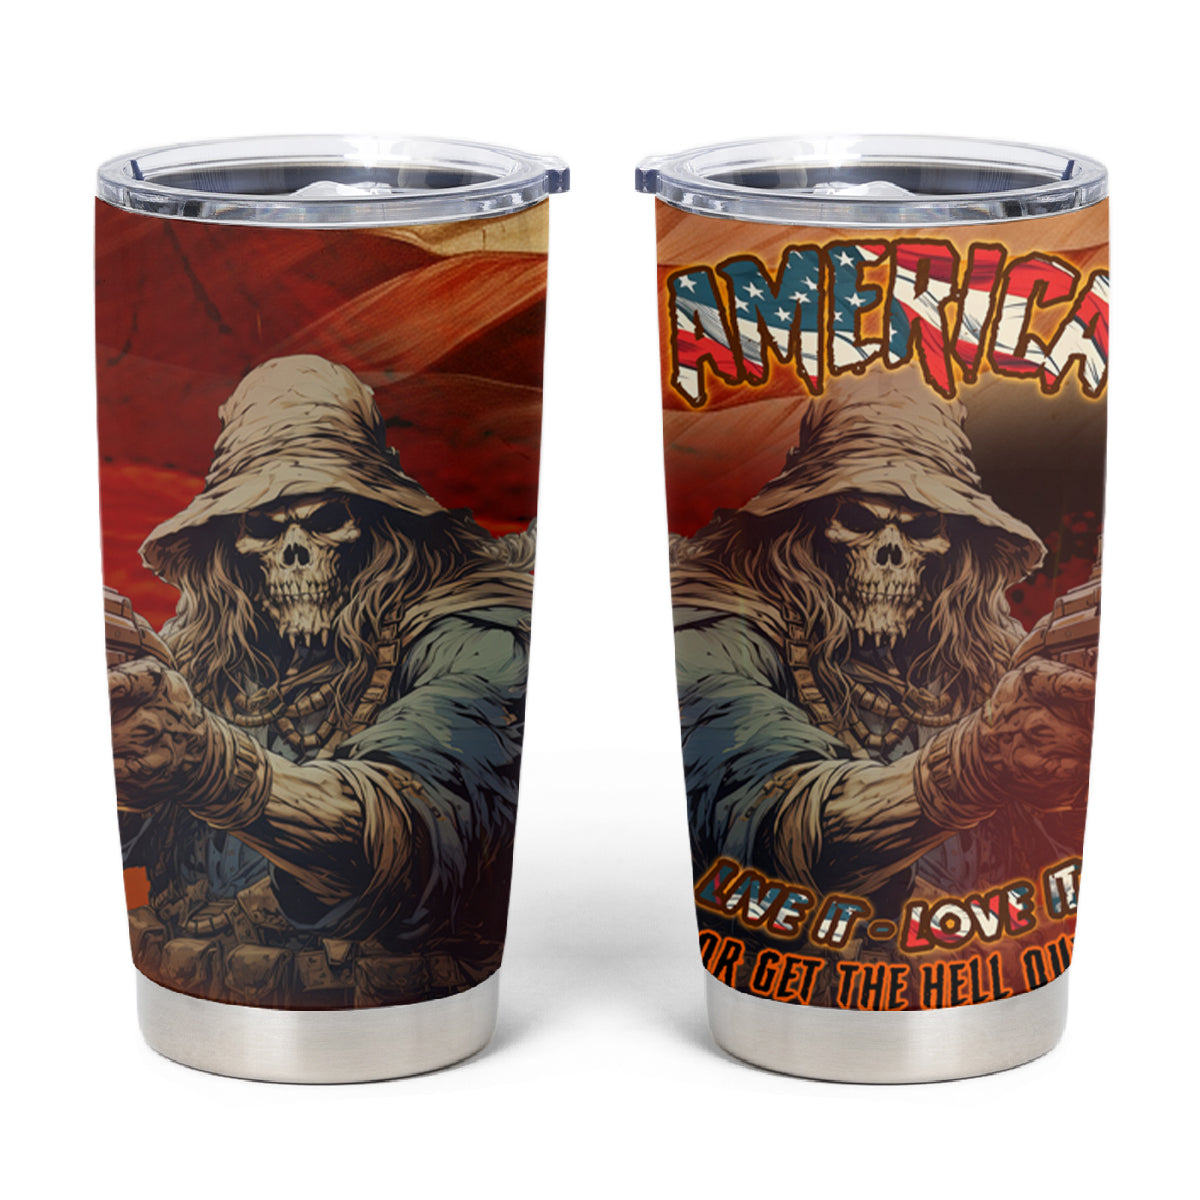 America Live It - Love It Or Get The Hell Out Tumbler Cup